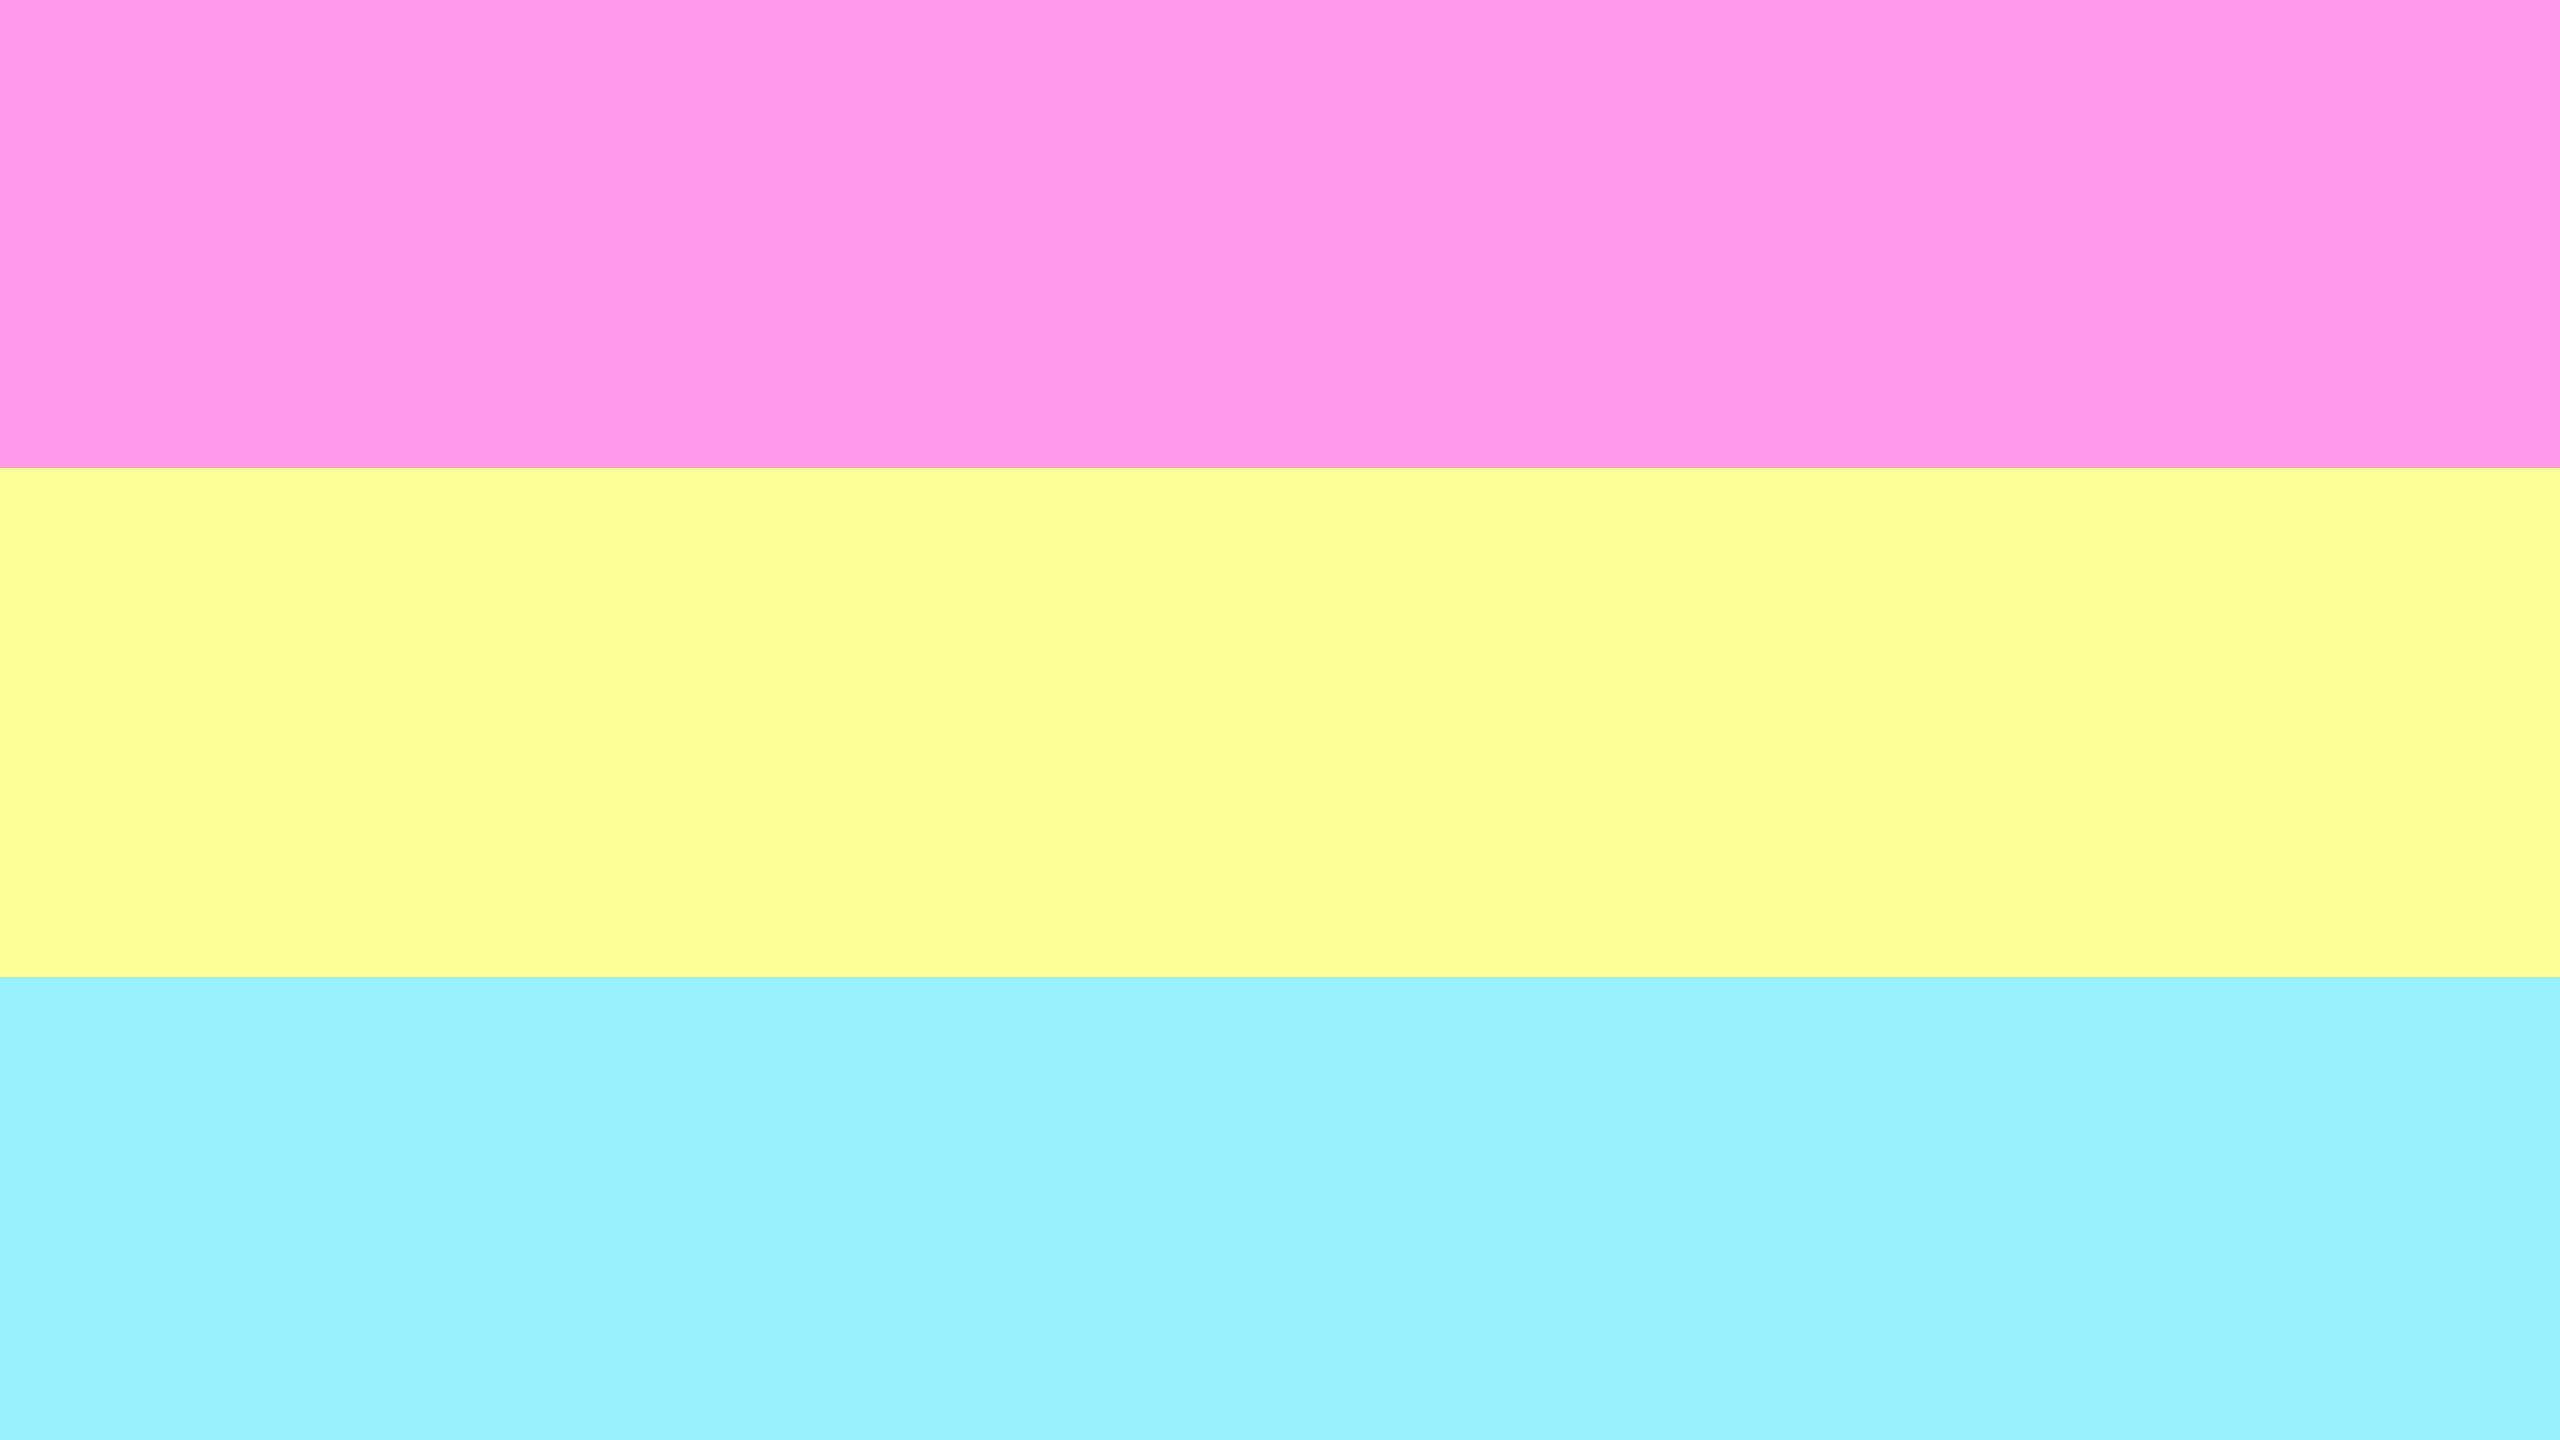 This visual is about pastel pastelpink pastelyellow pastelblue pansexual fr...